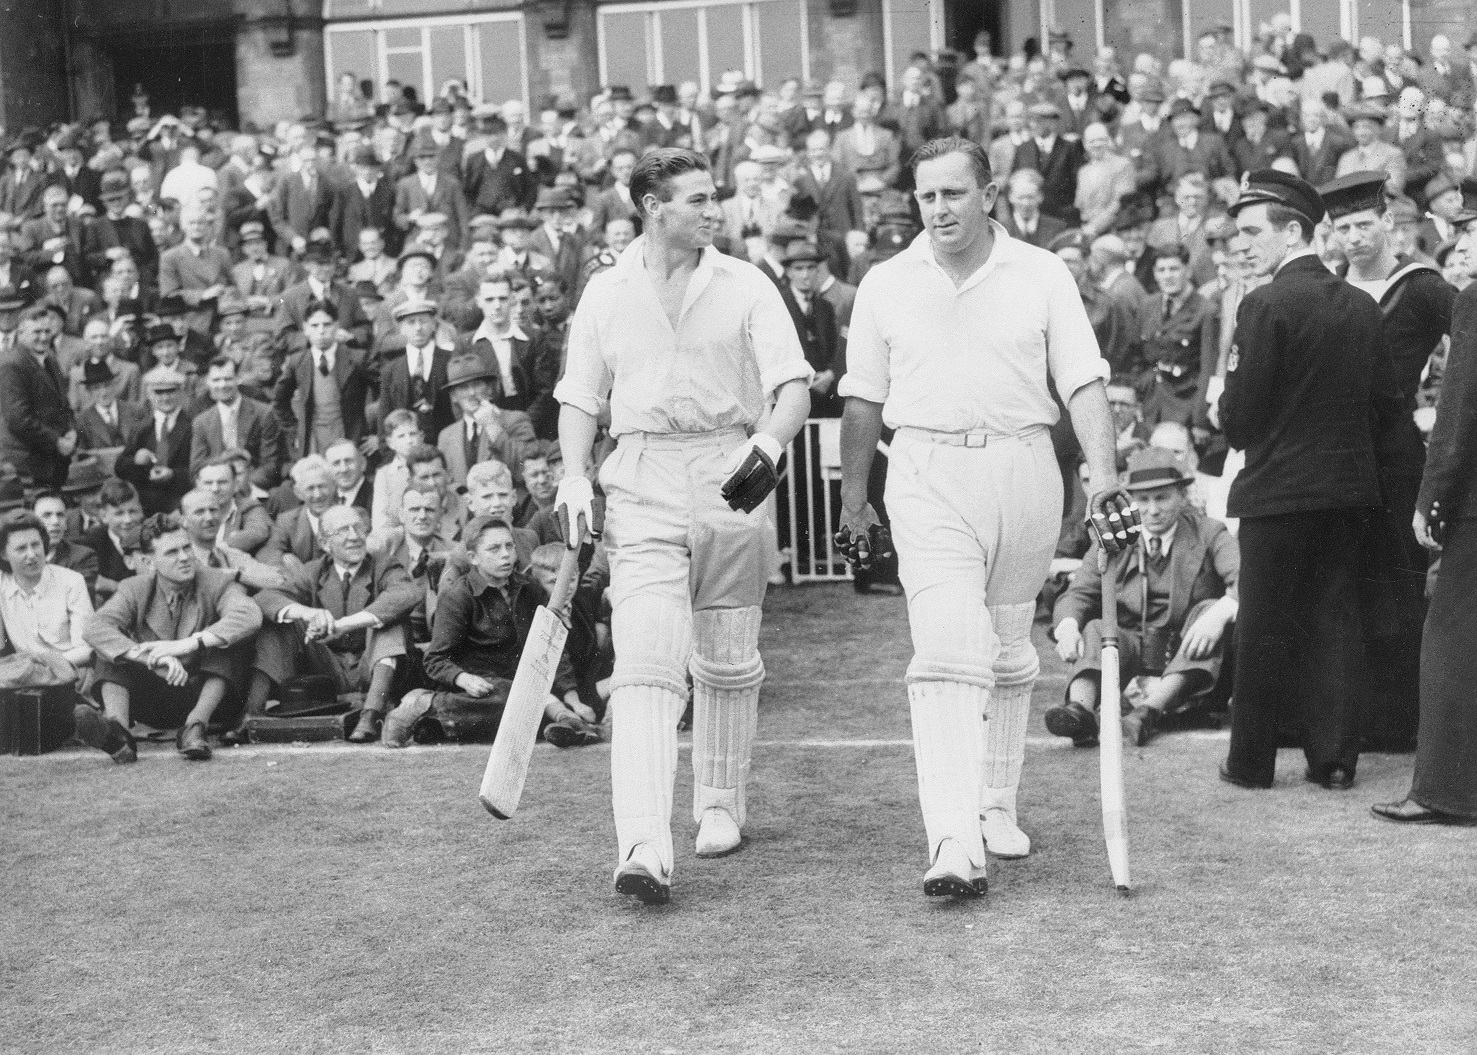 Keith Miller (left) and Cec Petter go out to bat in a Victory Test in 1945